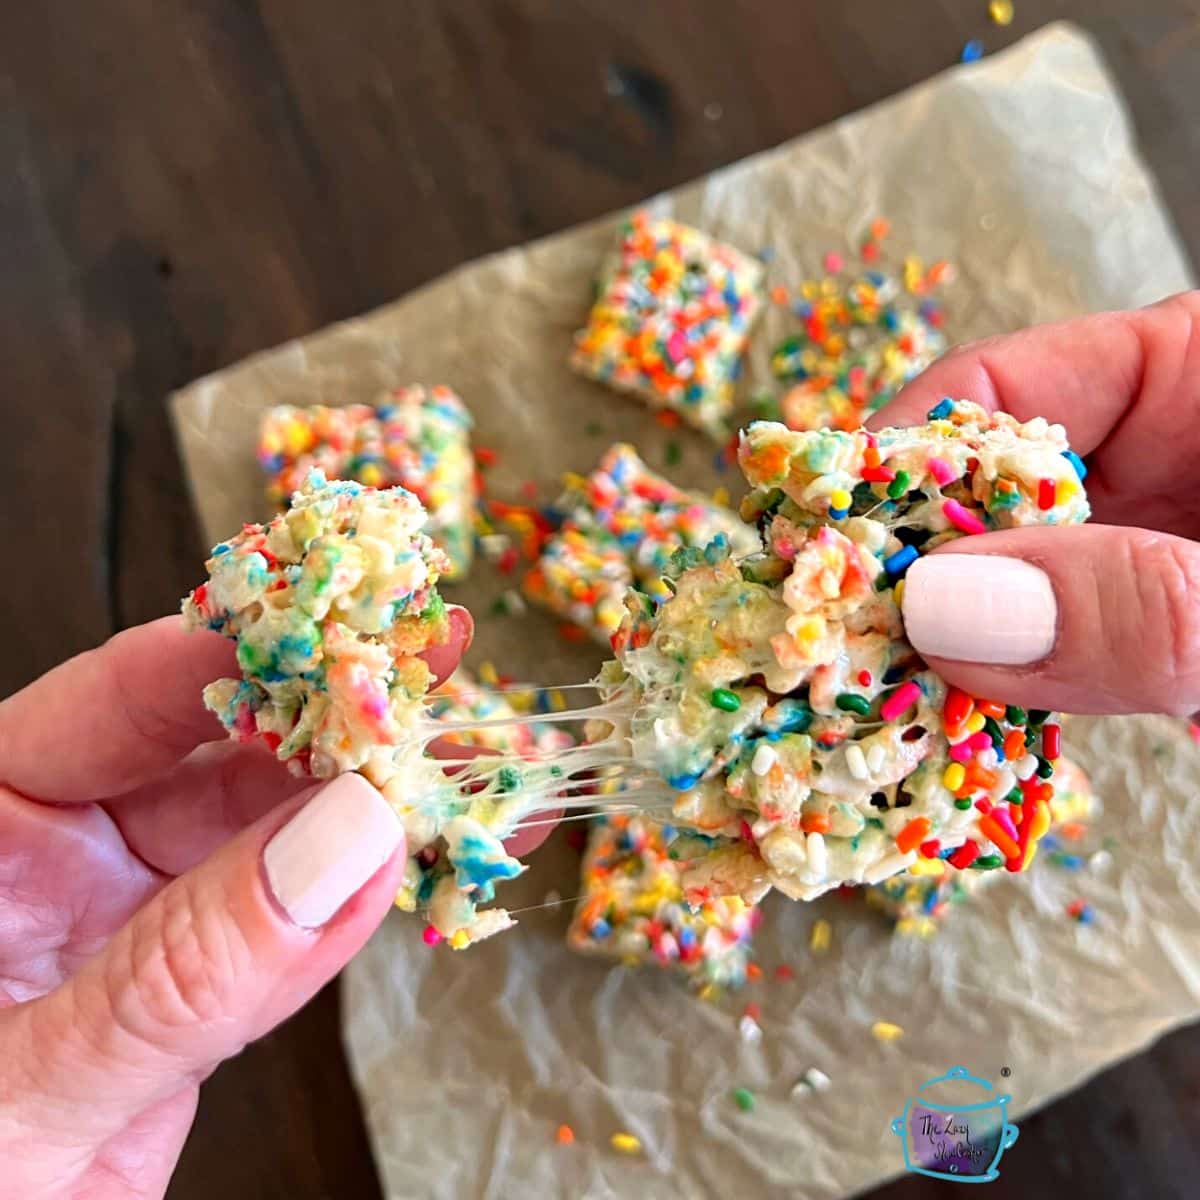 a close shot of some colorful slow cooker rice and marshmallow squares